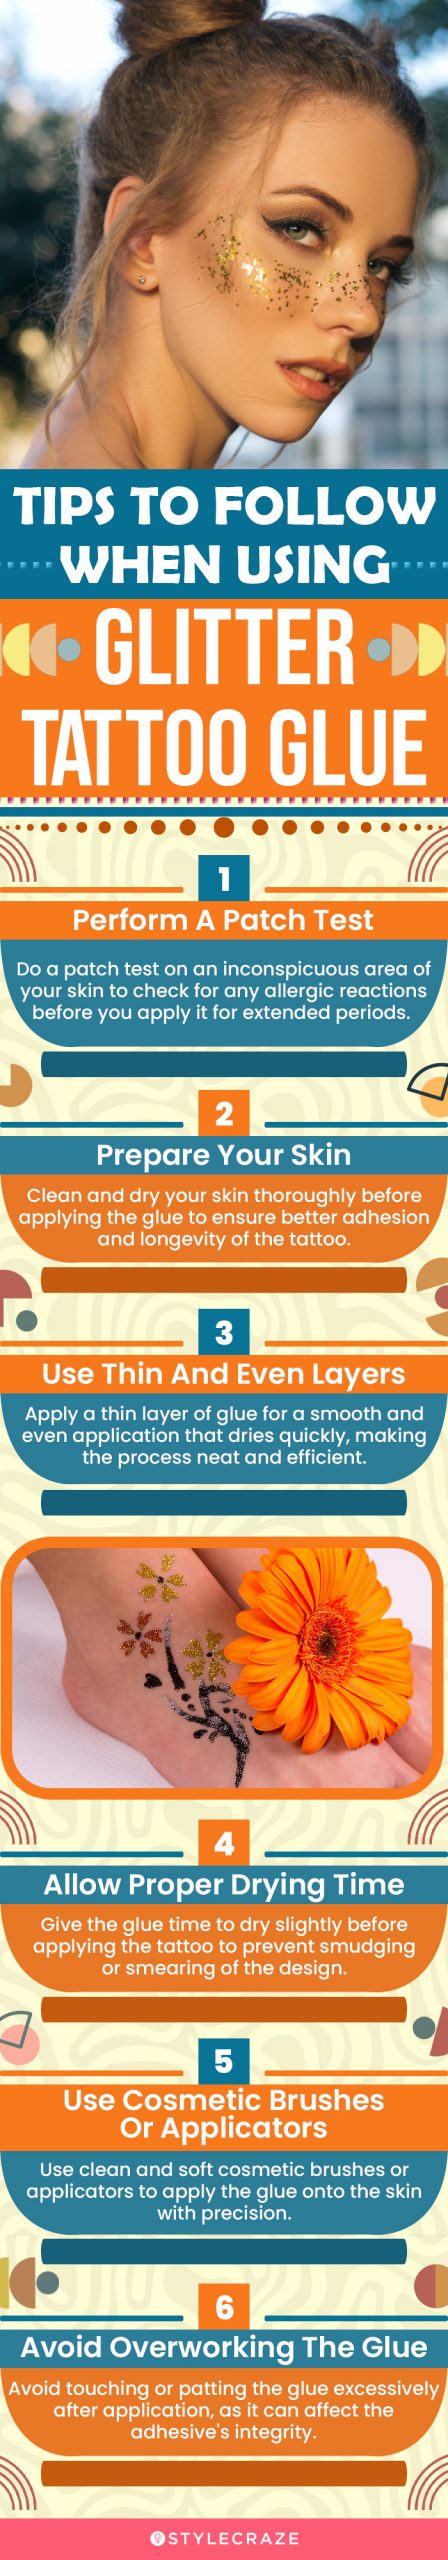 Tips To Follow When Using Glitter Tattoo Glue (infographic)